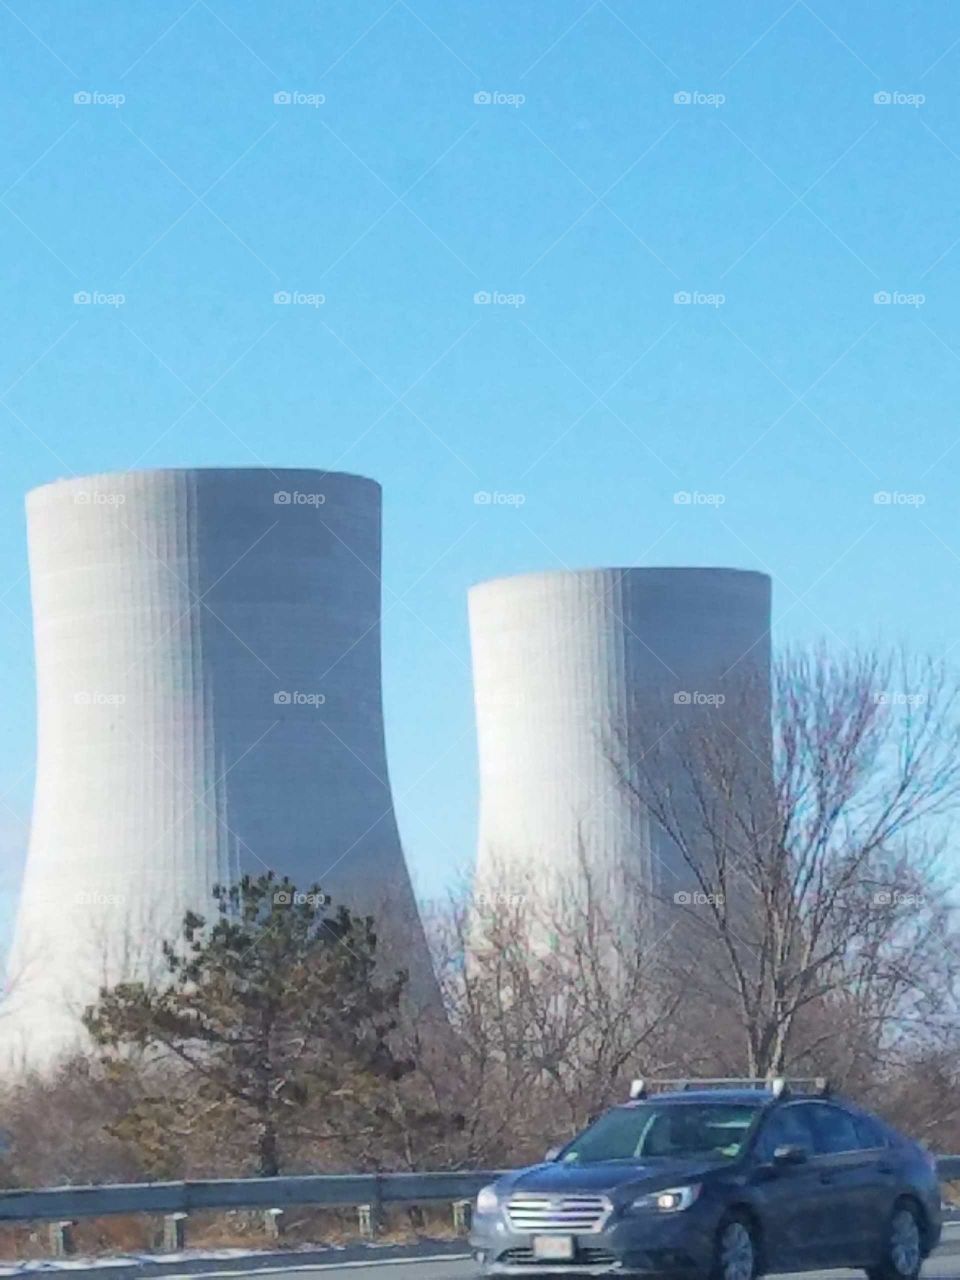 Nuclear power plant Cooling Towers seen from highway, two of them.